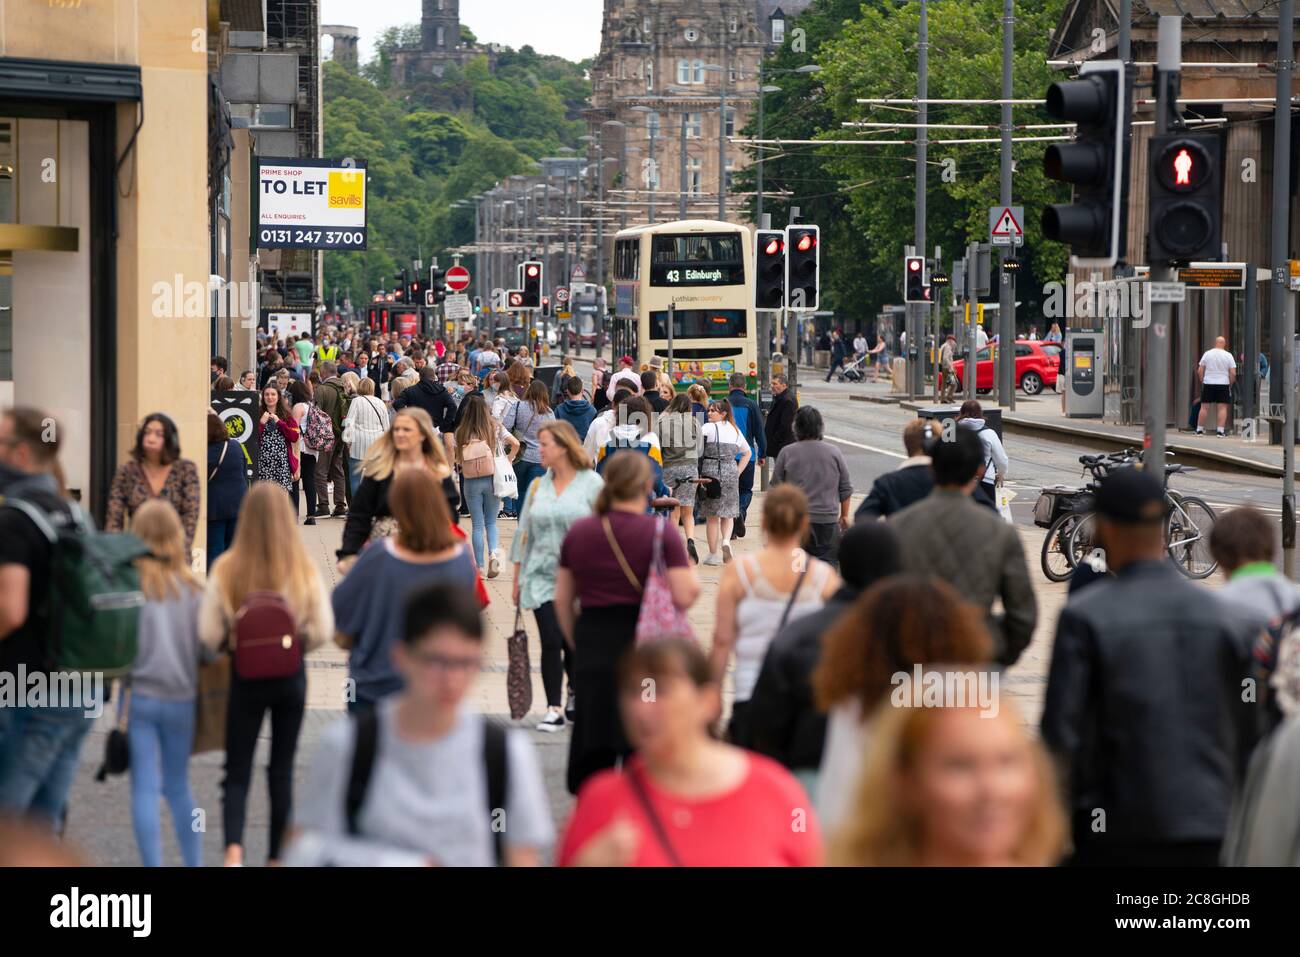 Edinburgh, Scotland, UK. 24 July, 2020. View along busy Princes Street with large numbers of people out shopping during sales. Iain Masterton/Alamy Live News Stock Photo